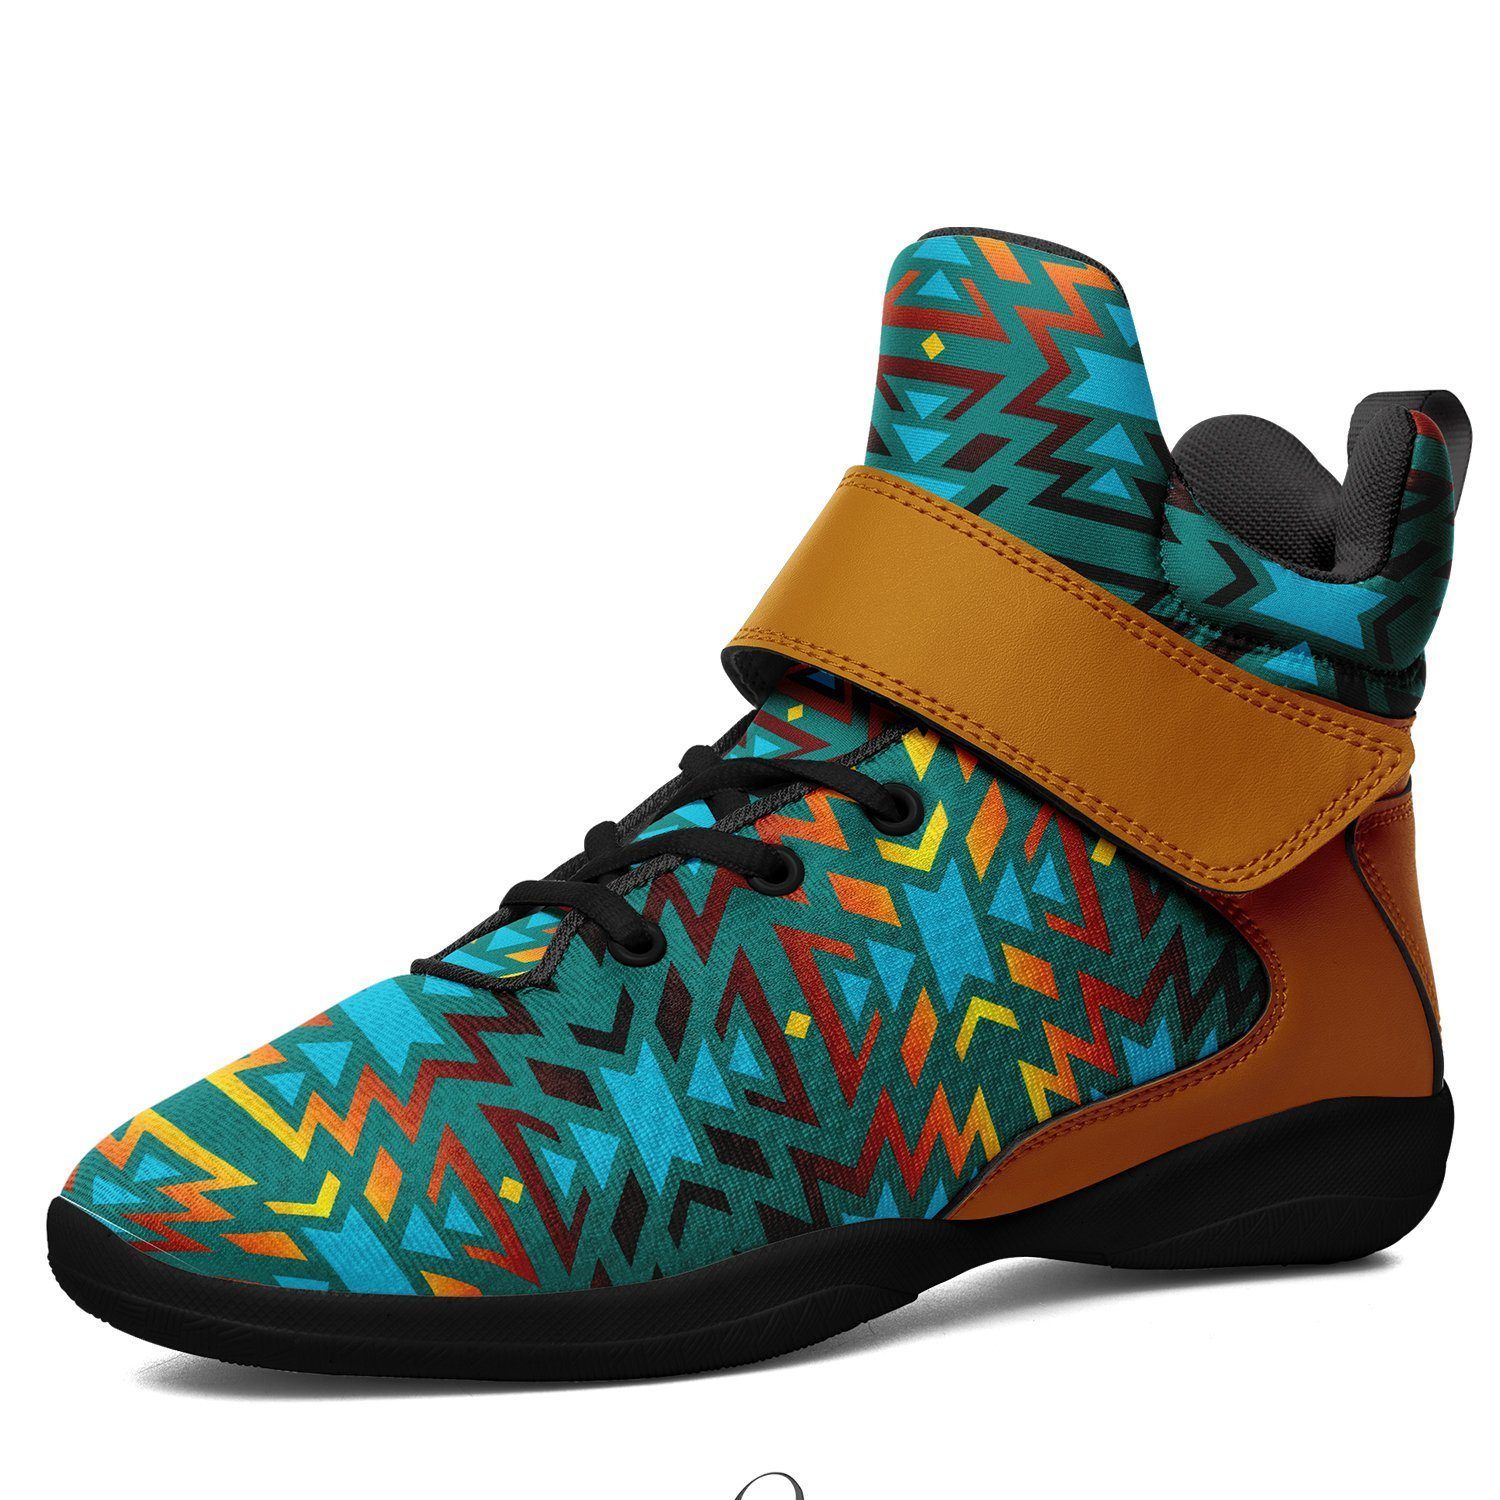 Fire Colors and Turquoise Teal Ipottaa Basketball / Sport High Top Shoes - Black Sole 49 Dzine US Men 7 / EUR 40 Black Sole with Brown Strap 